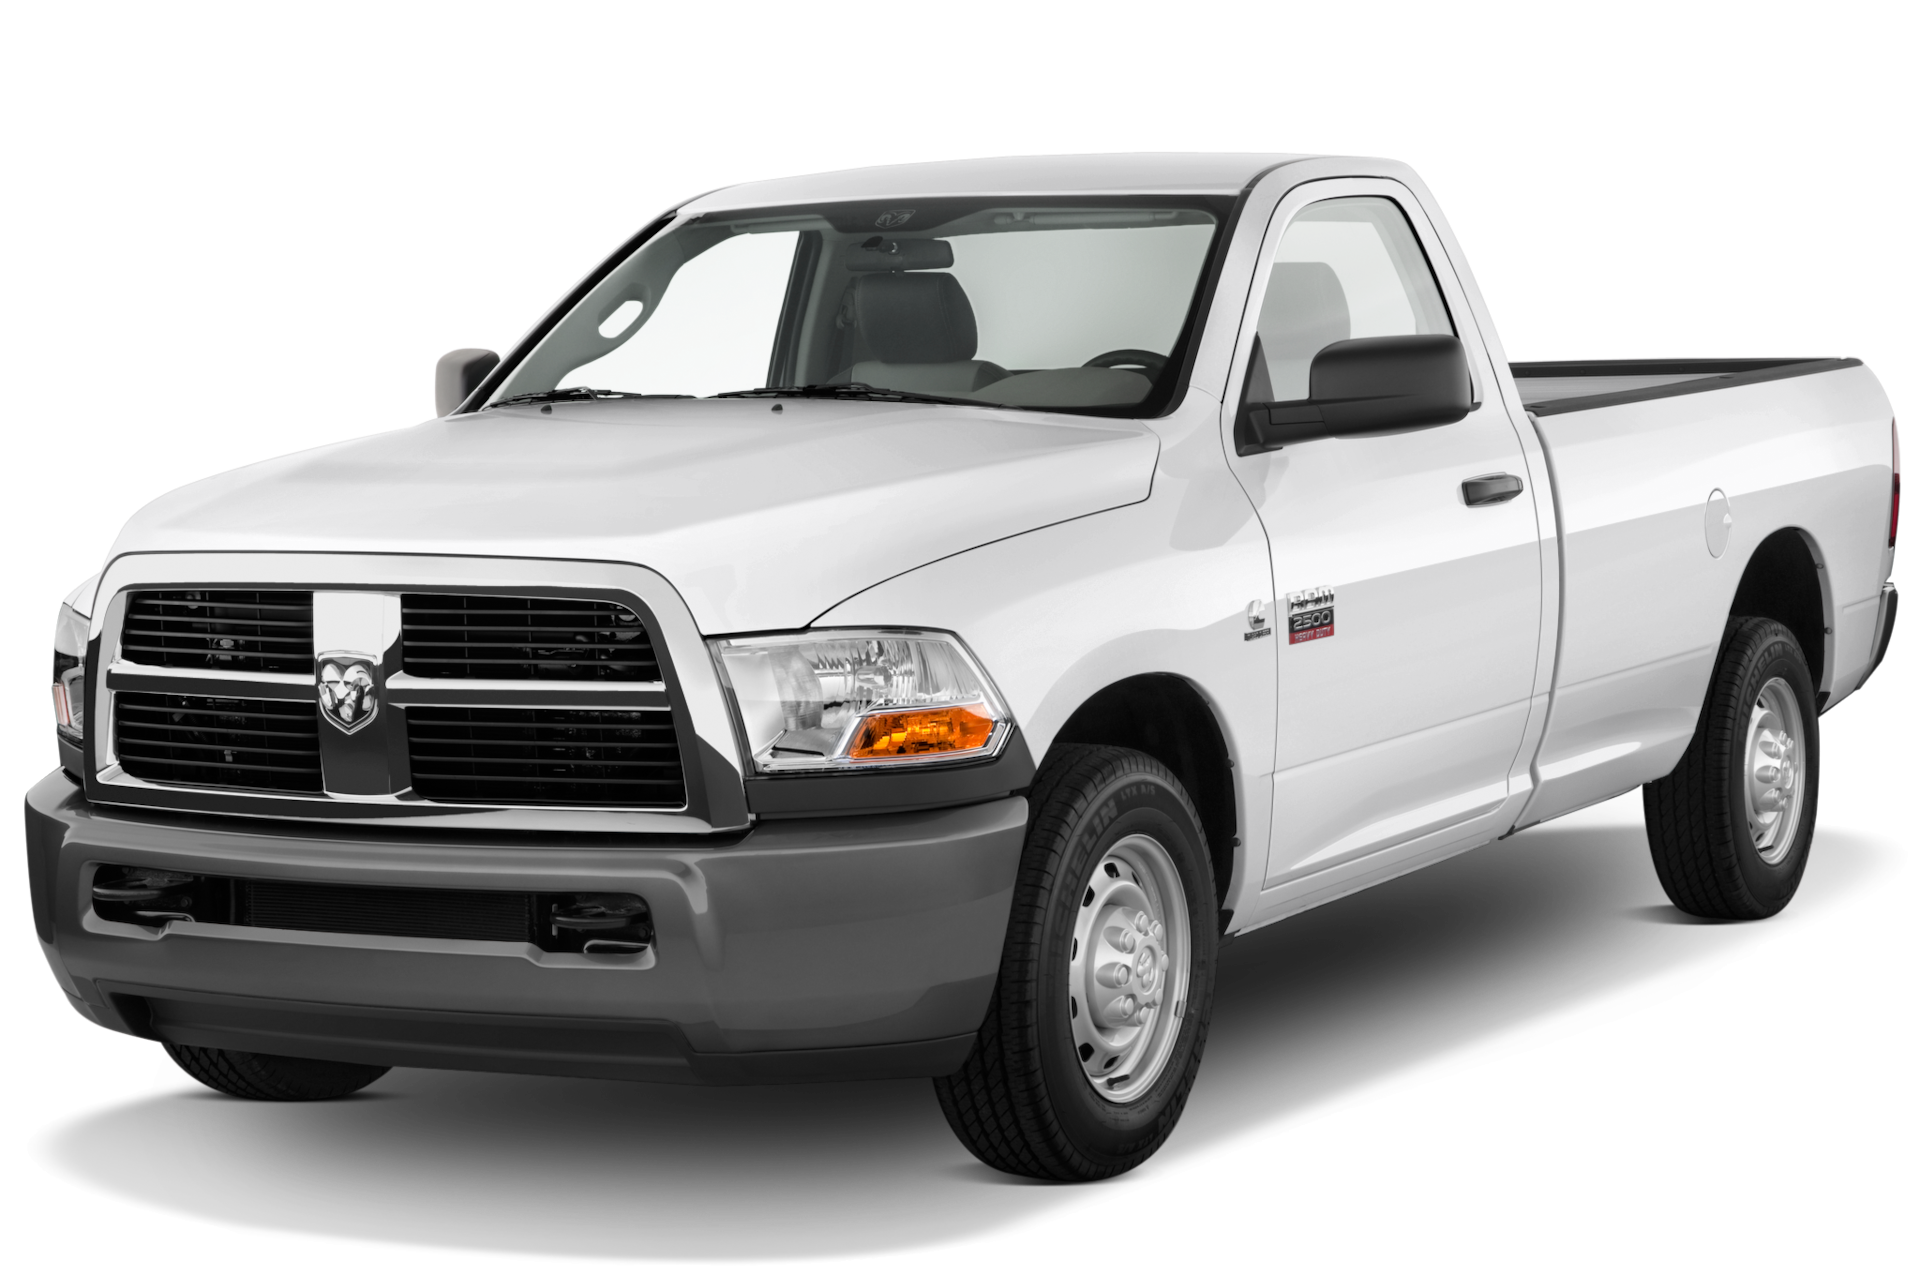 2012 Ram 2500 Prices, Reviews, and Photos - MotorTrend